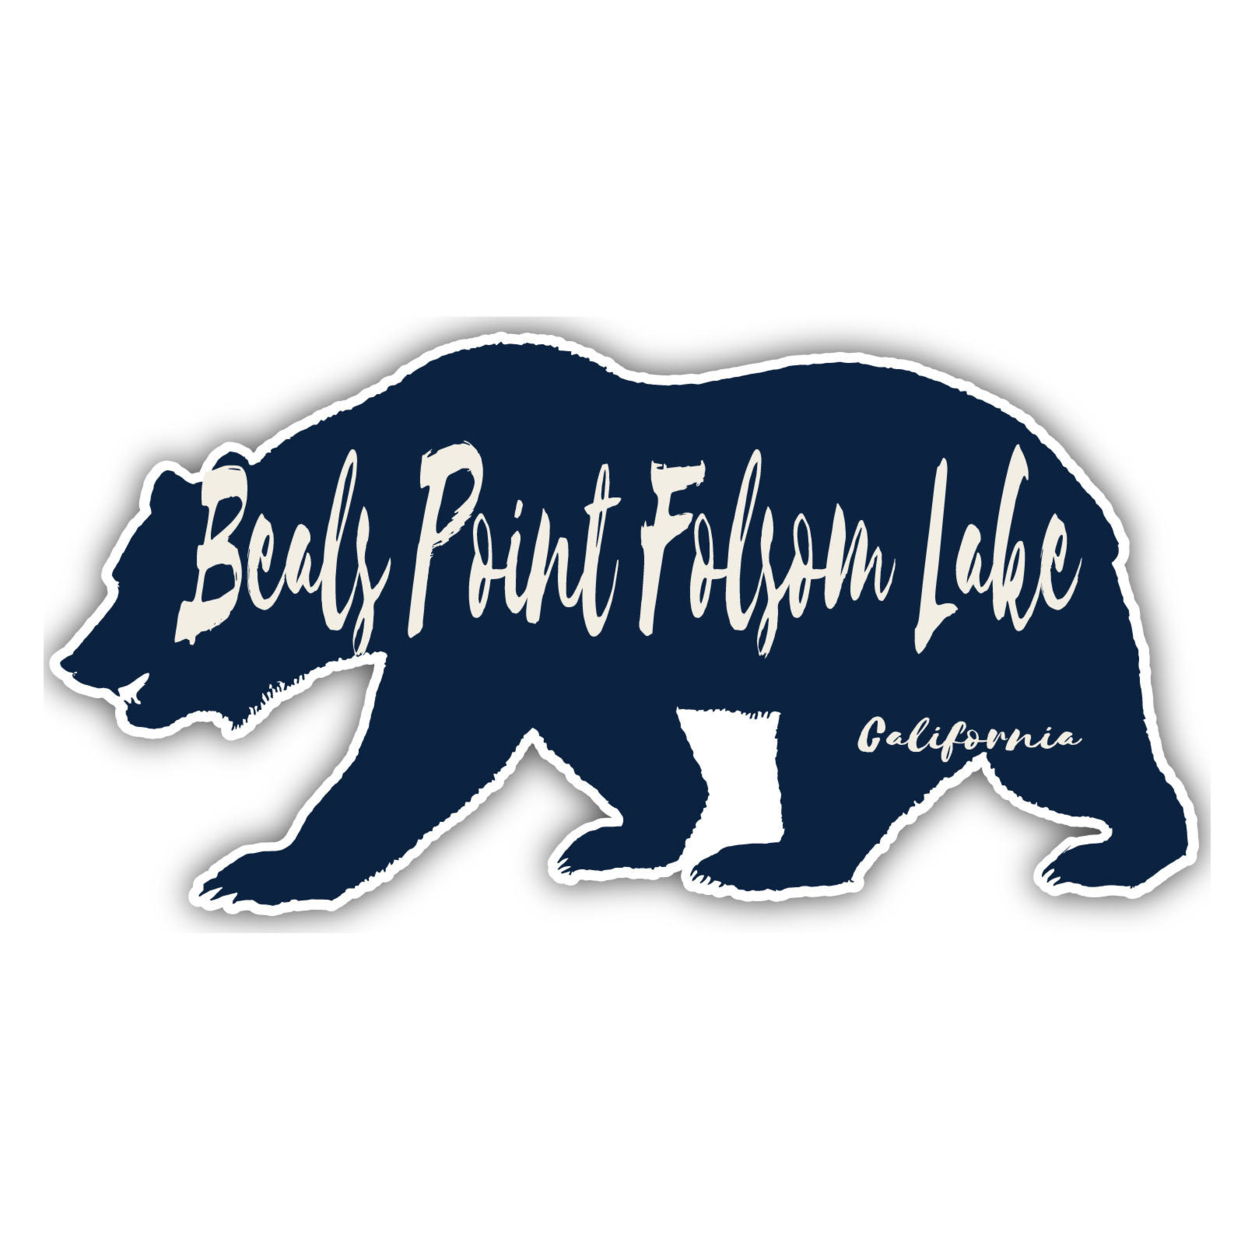 Beals Point Folsom Lake California Souvenir Decorative Stickers (Choose Theme And Size) - 4-Pack, 12-Inch, Bear